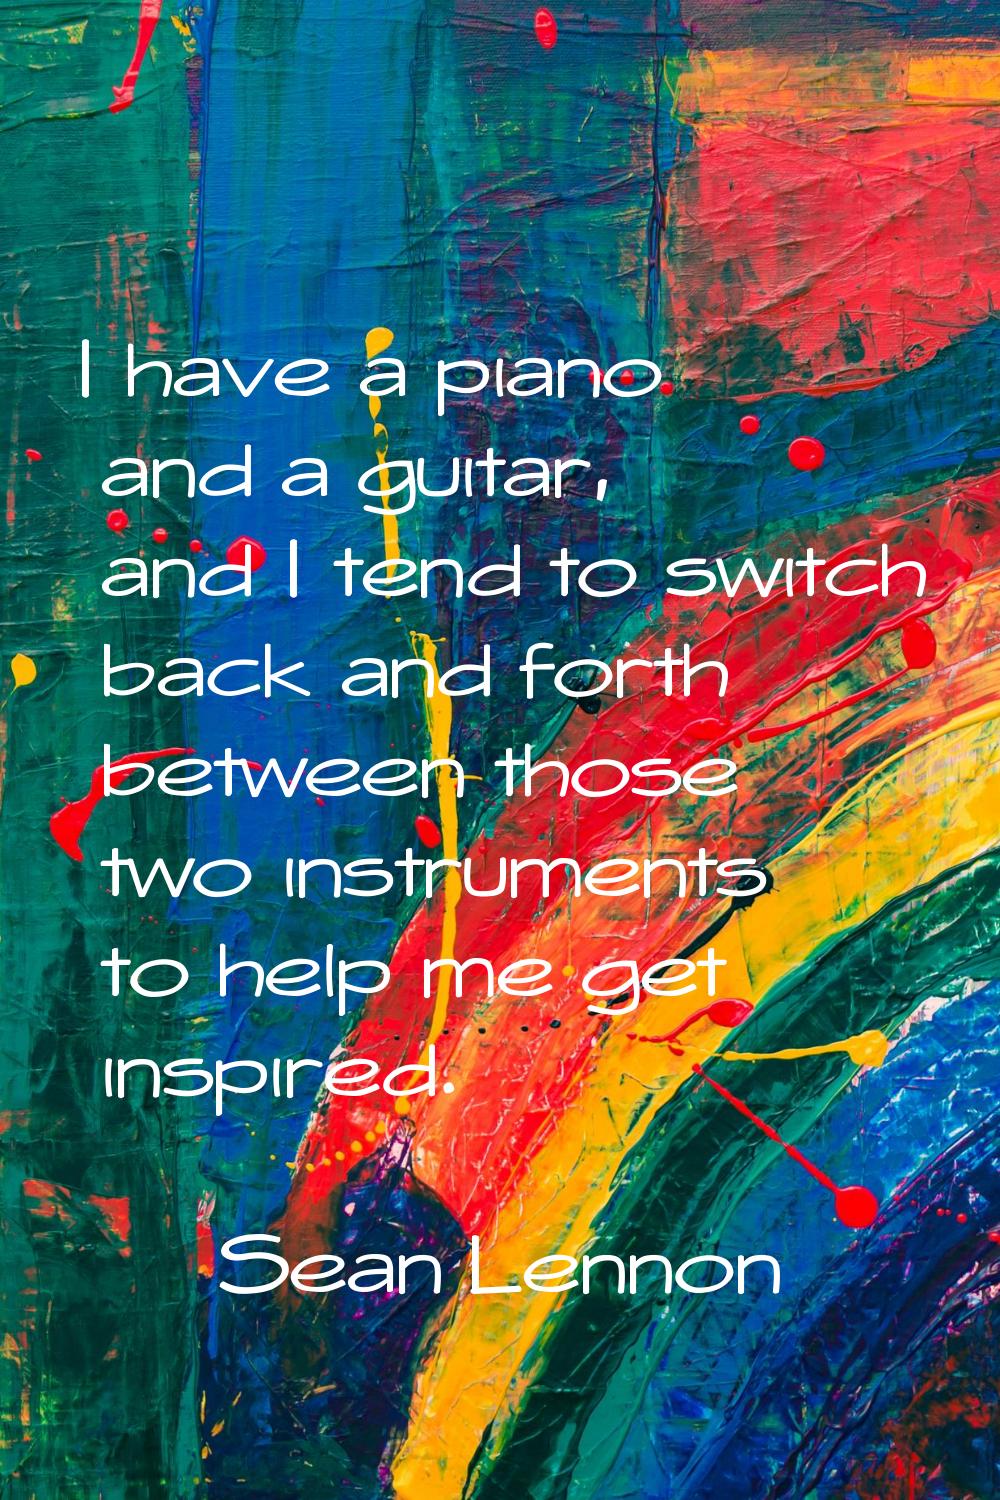 I have a piano and a guitar, and I tend to switch back and forth between those two instruments to h